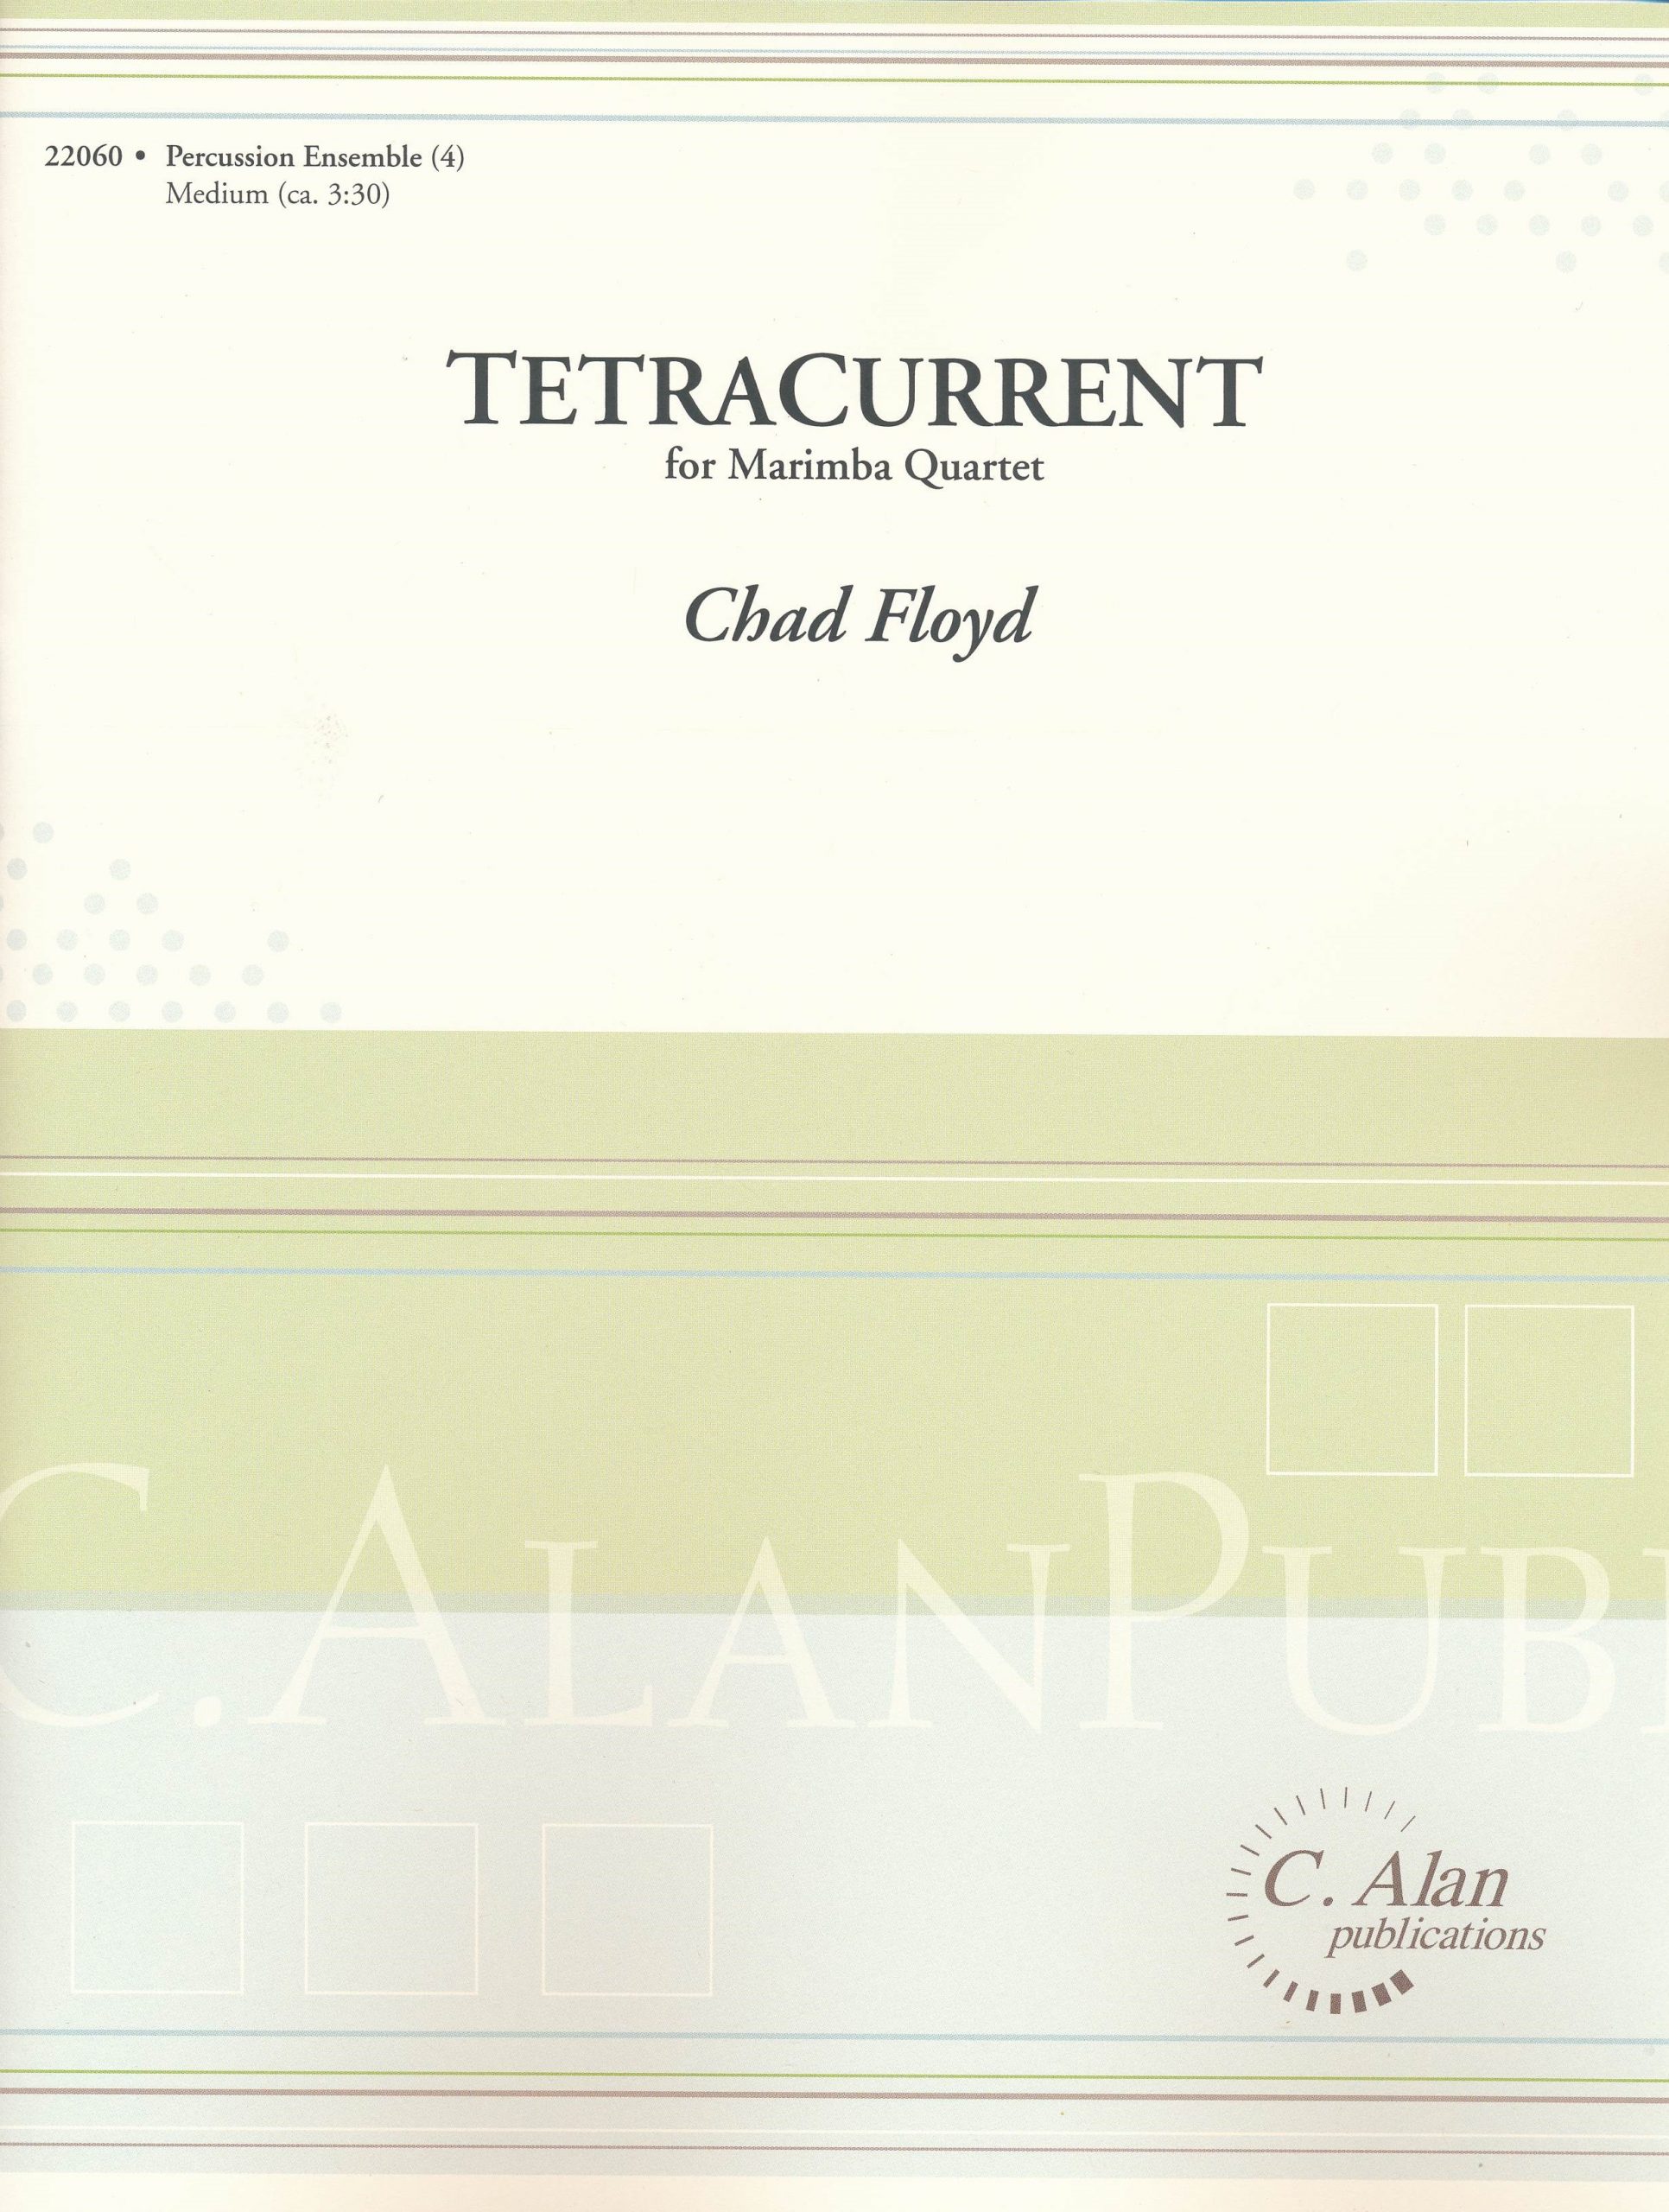 TetraCurrent by Chad Floyd